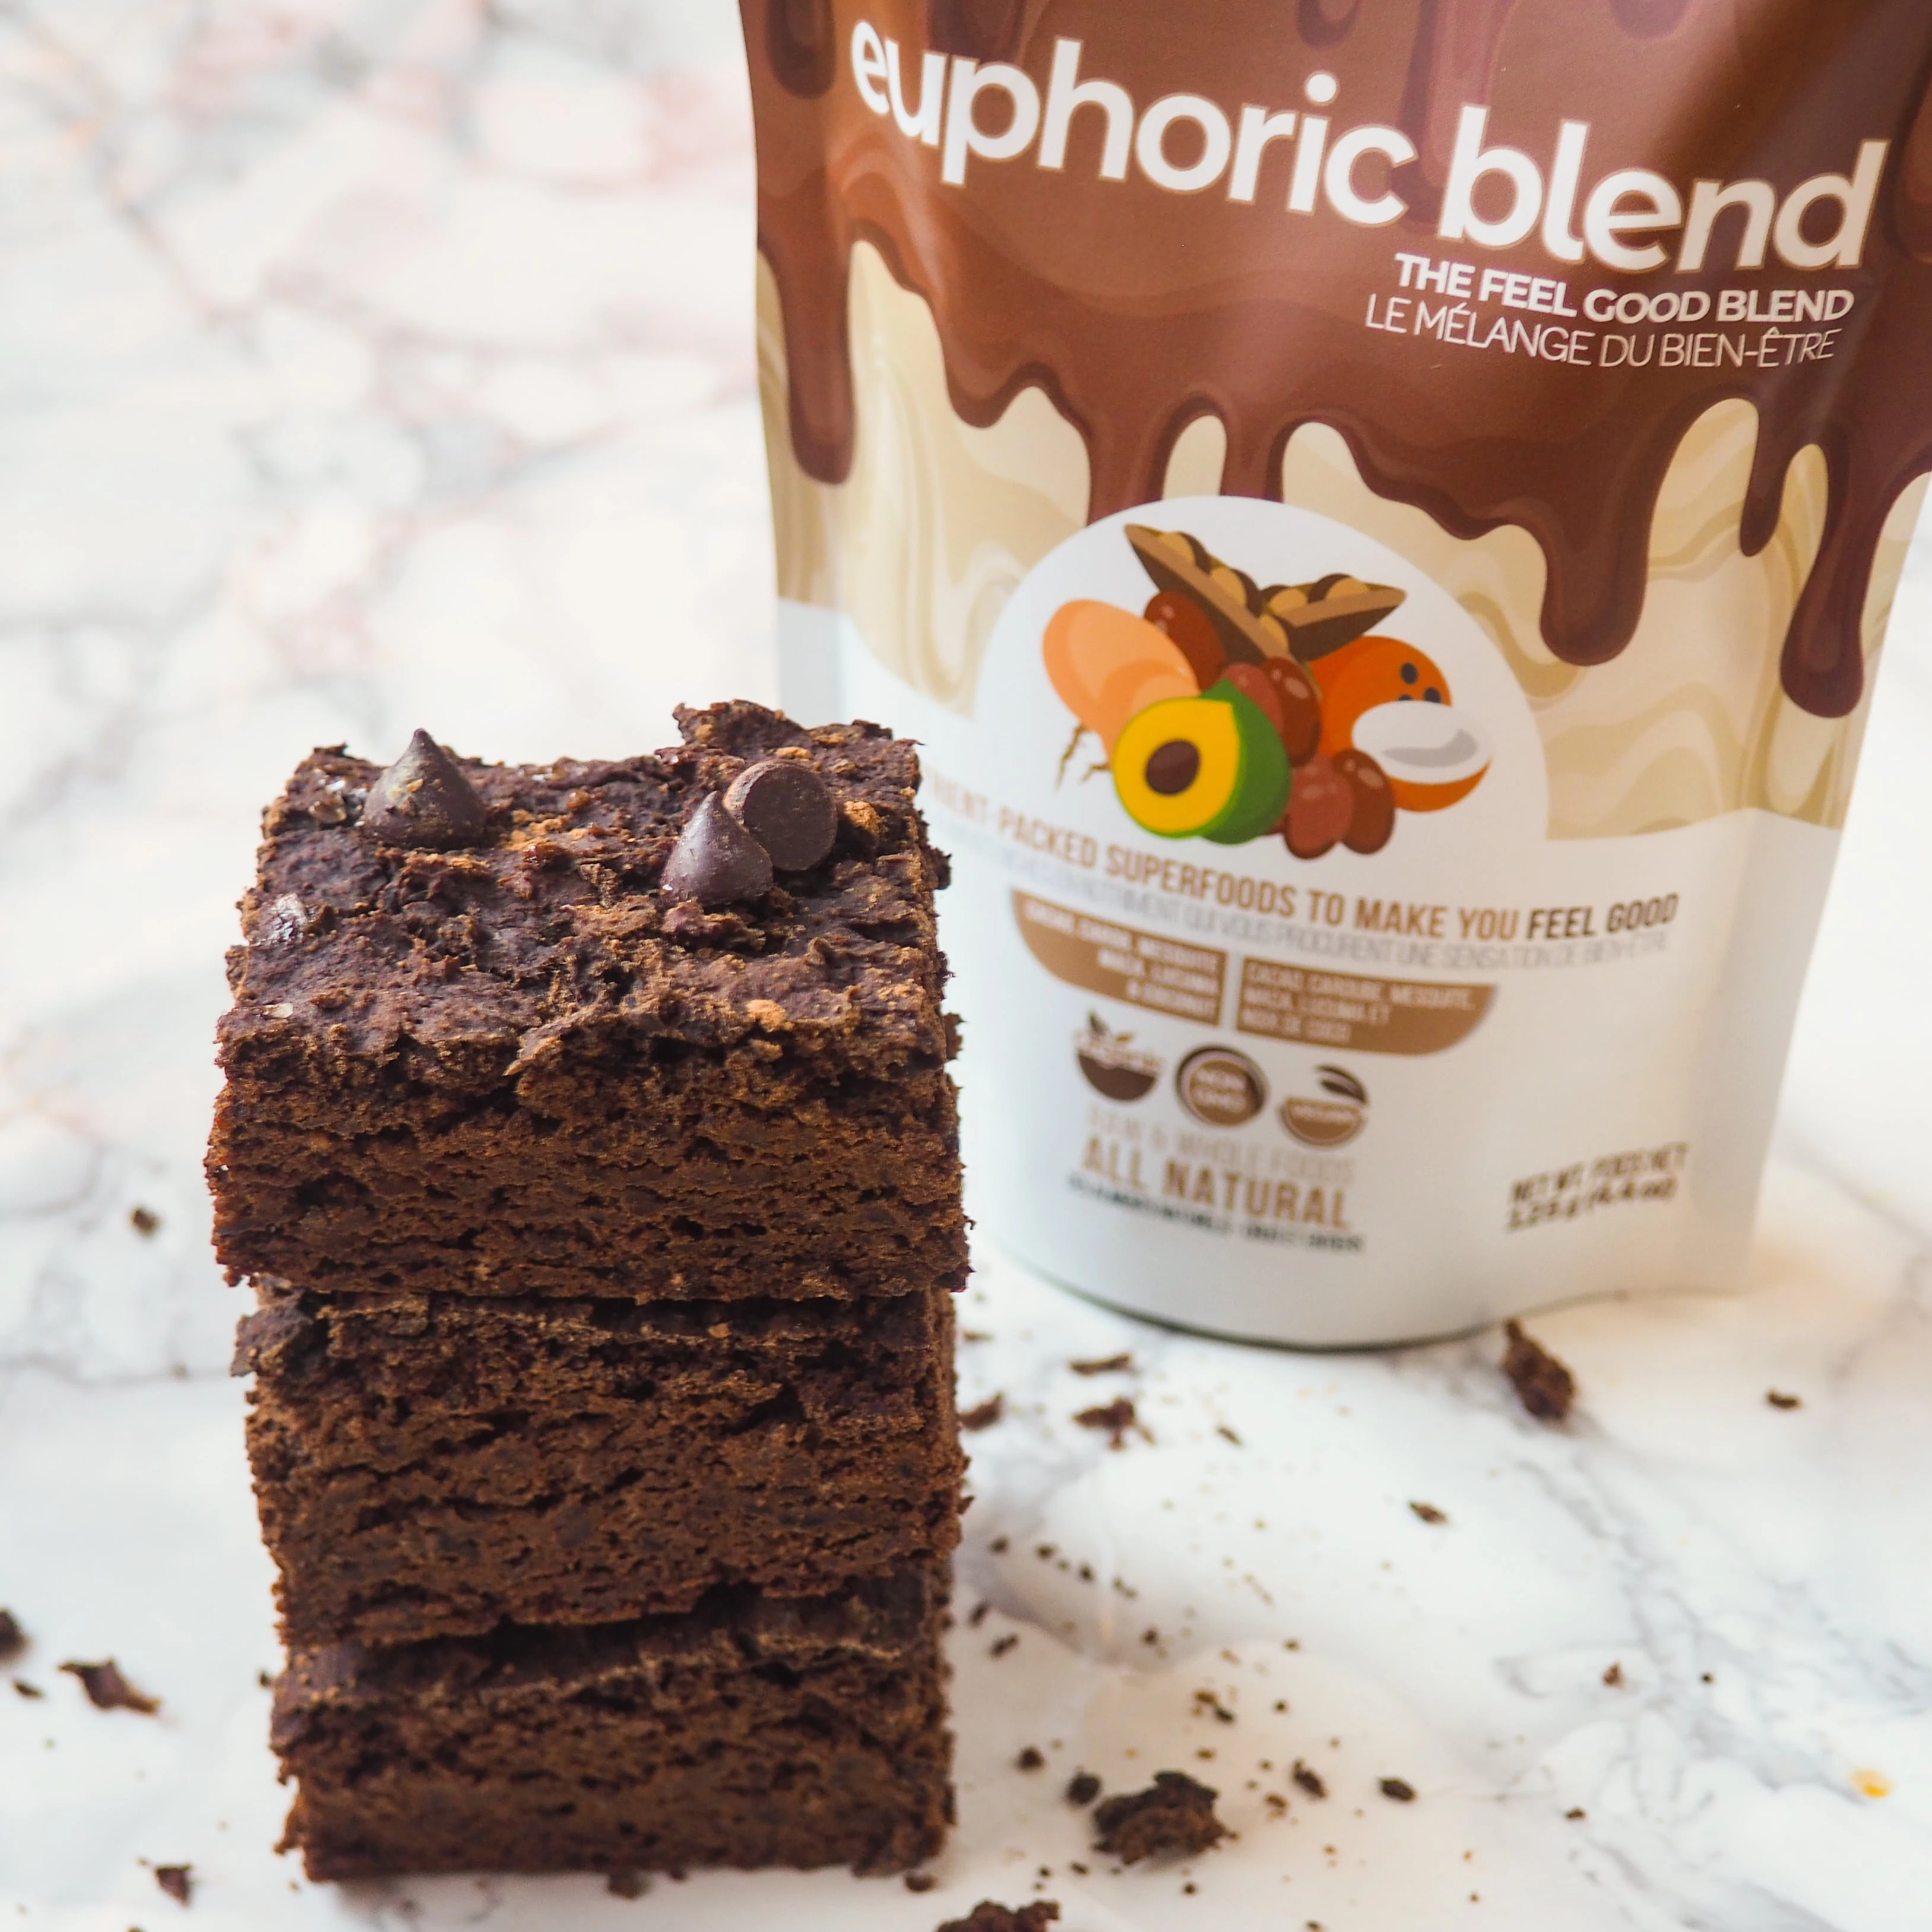 Looking for a pick-me-up? Craving a chocolatey beverage? Why not have smoothie for dessert. Packed with micronutrients and an instant mood-booster. 